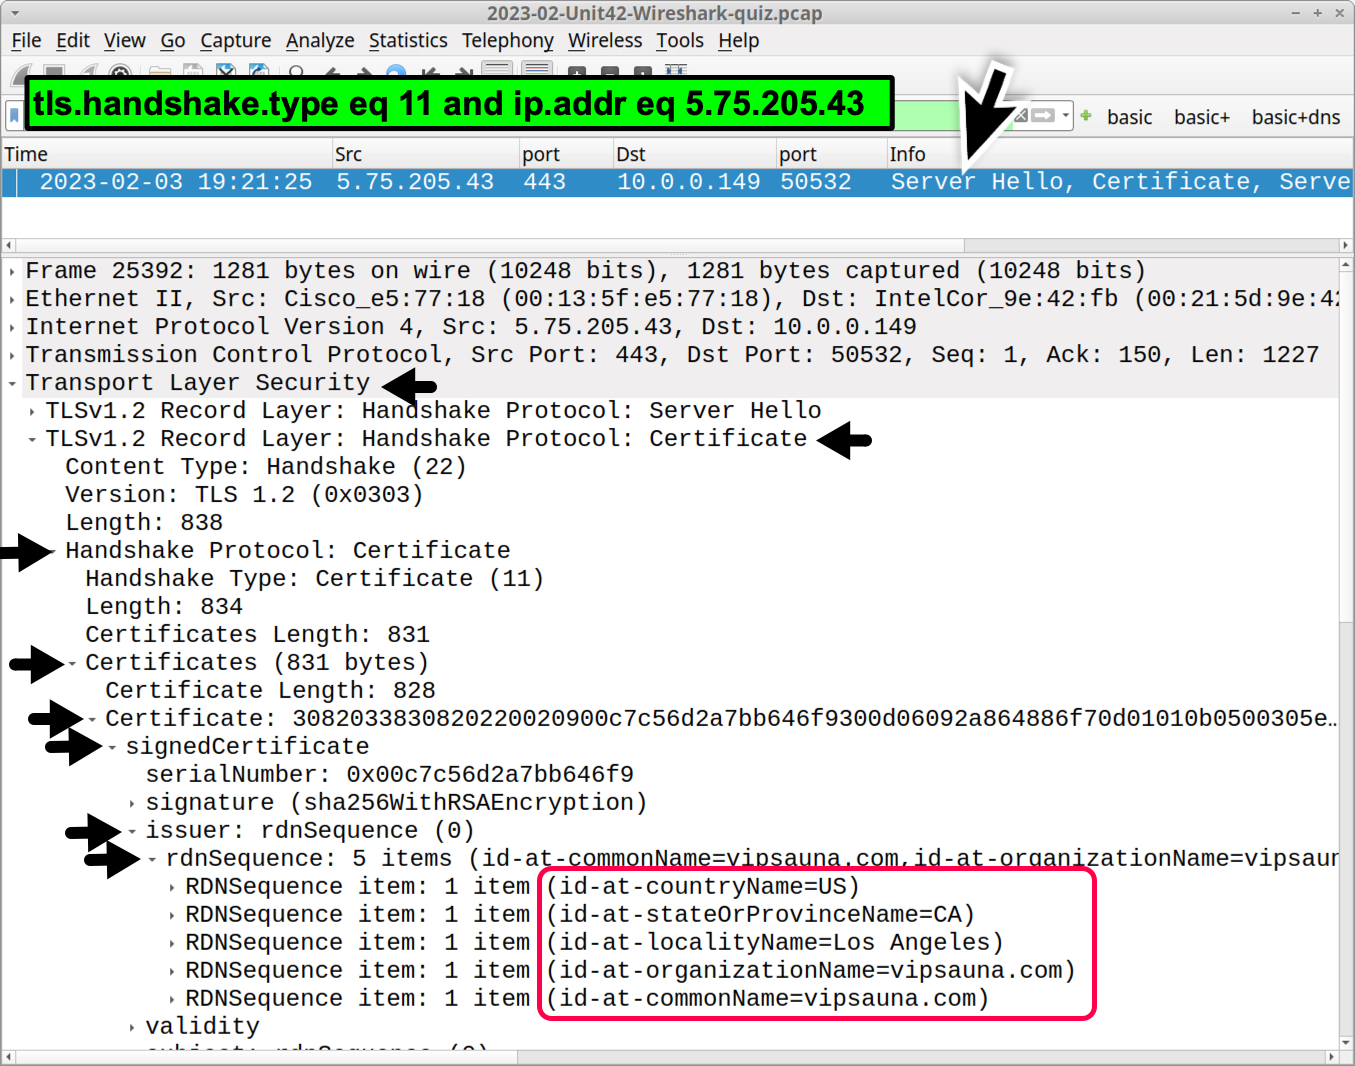 Image 11 is a screenshot of Wireshark highlighting, in red, the rdnSequence section of the certificate issuer data (highlighted with arrows).